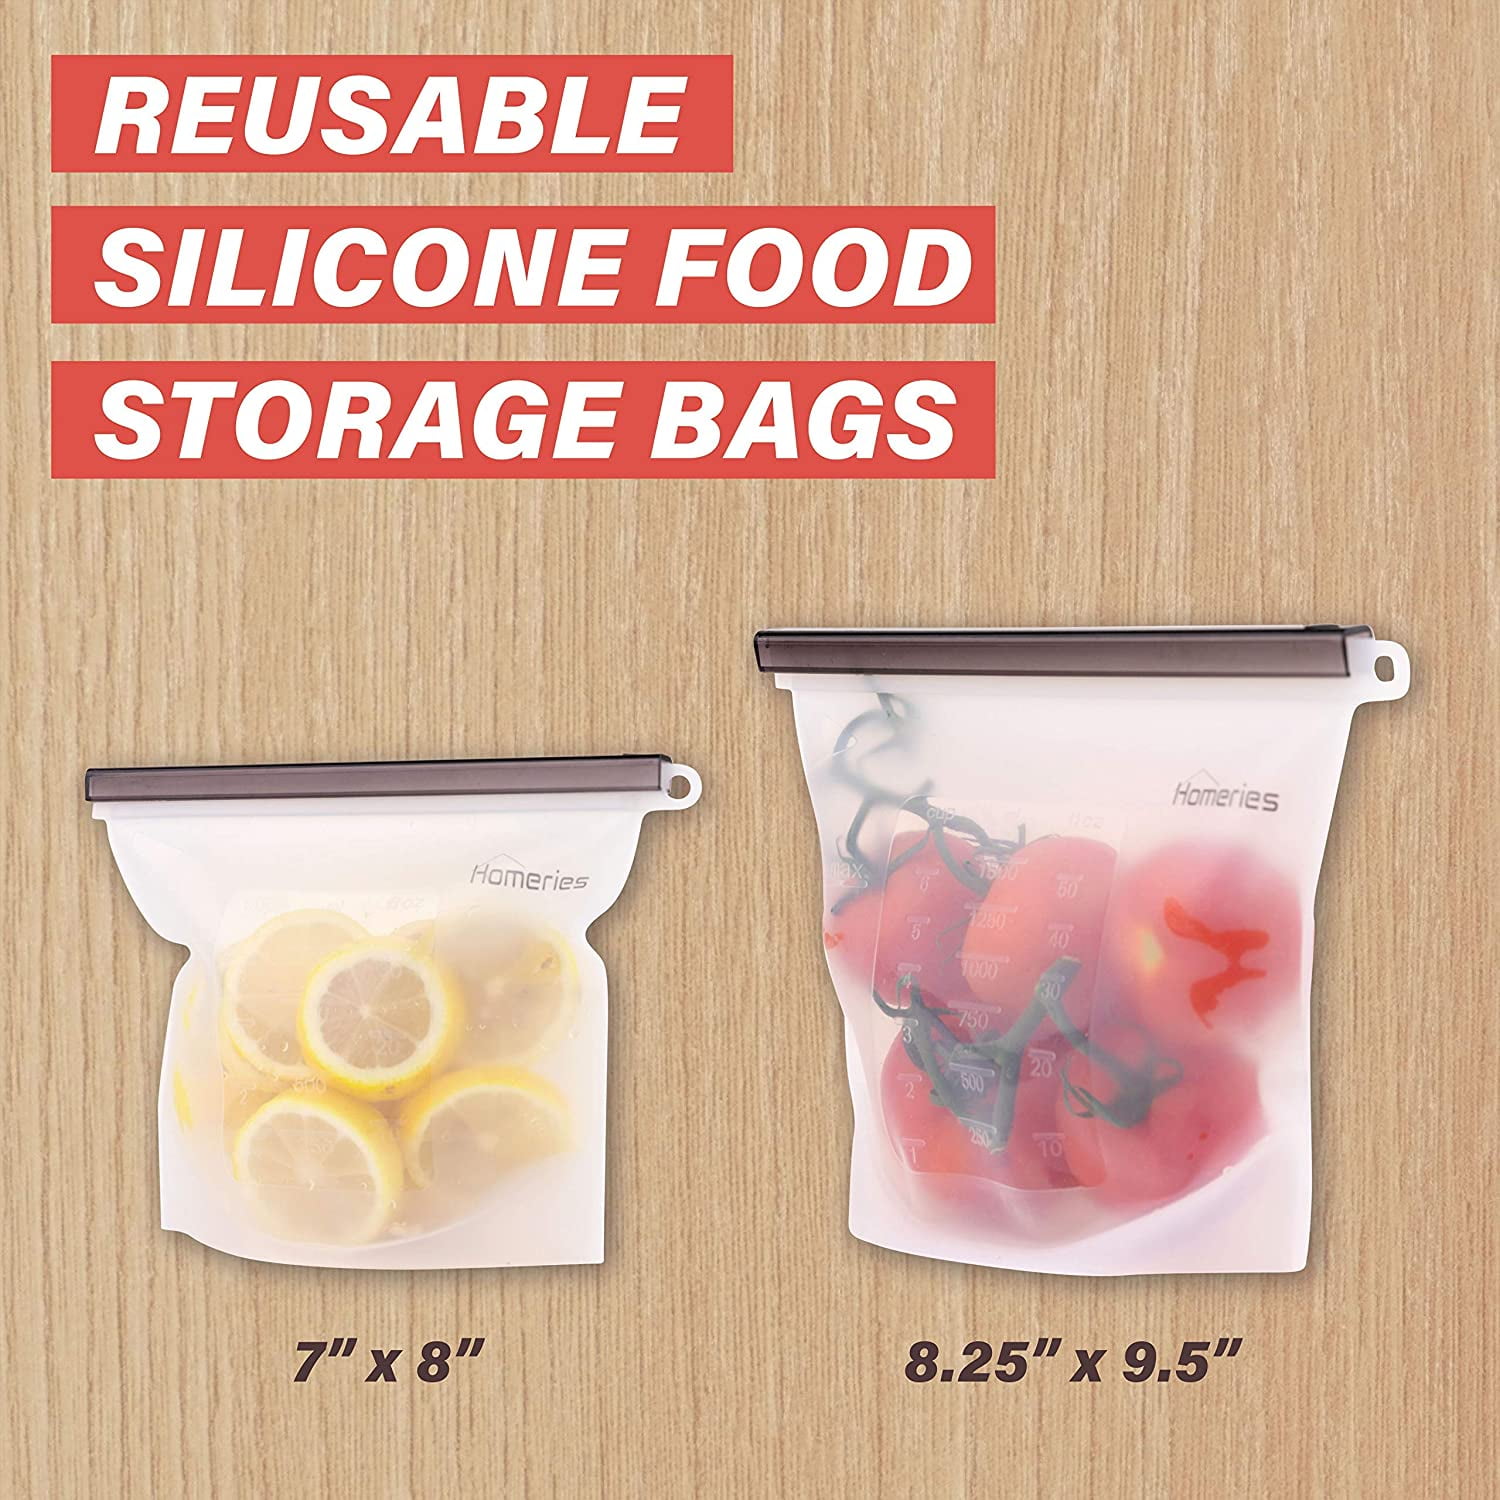 Reusable Silicone Food Storage Bags (2 Large + 2 Medium + 2 Small